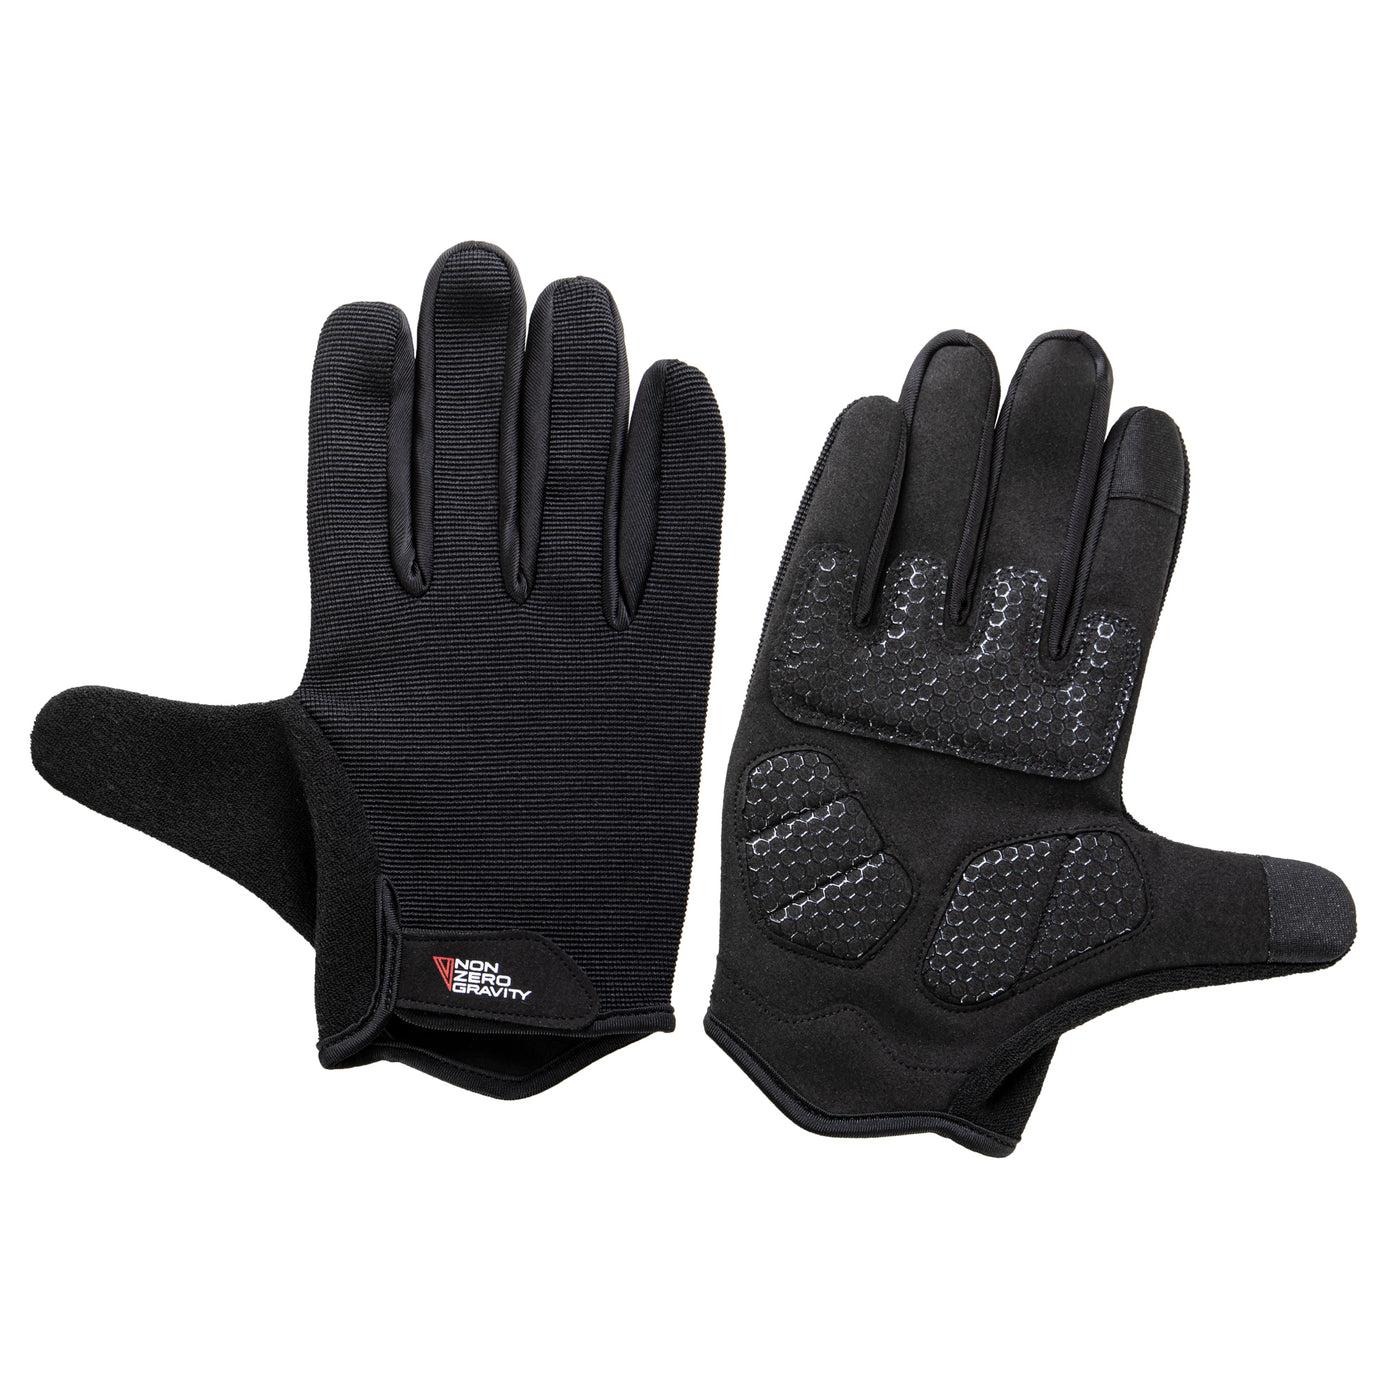 NonZero Gravity Tech-Touch Padded Weight Lifting Workout Gloves 